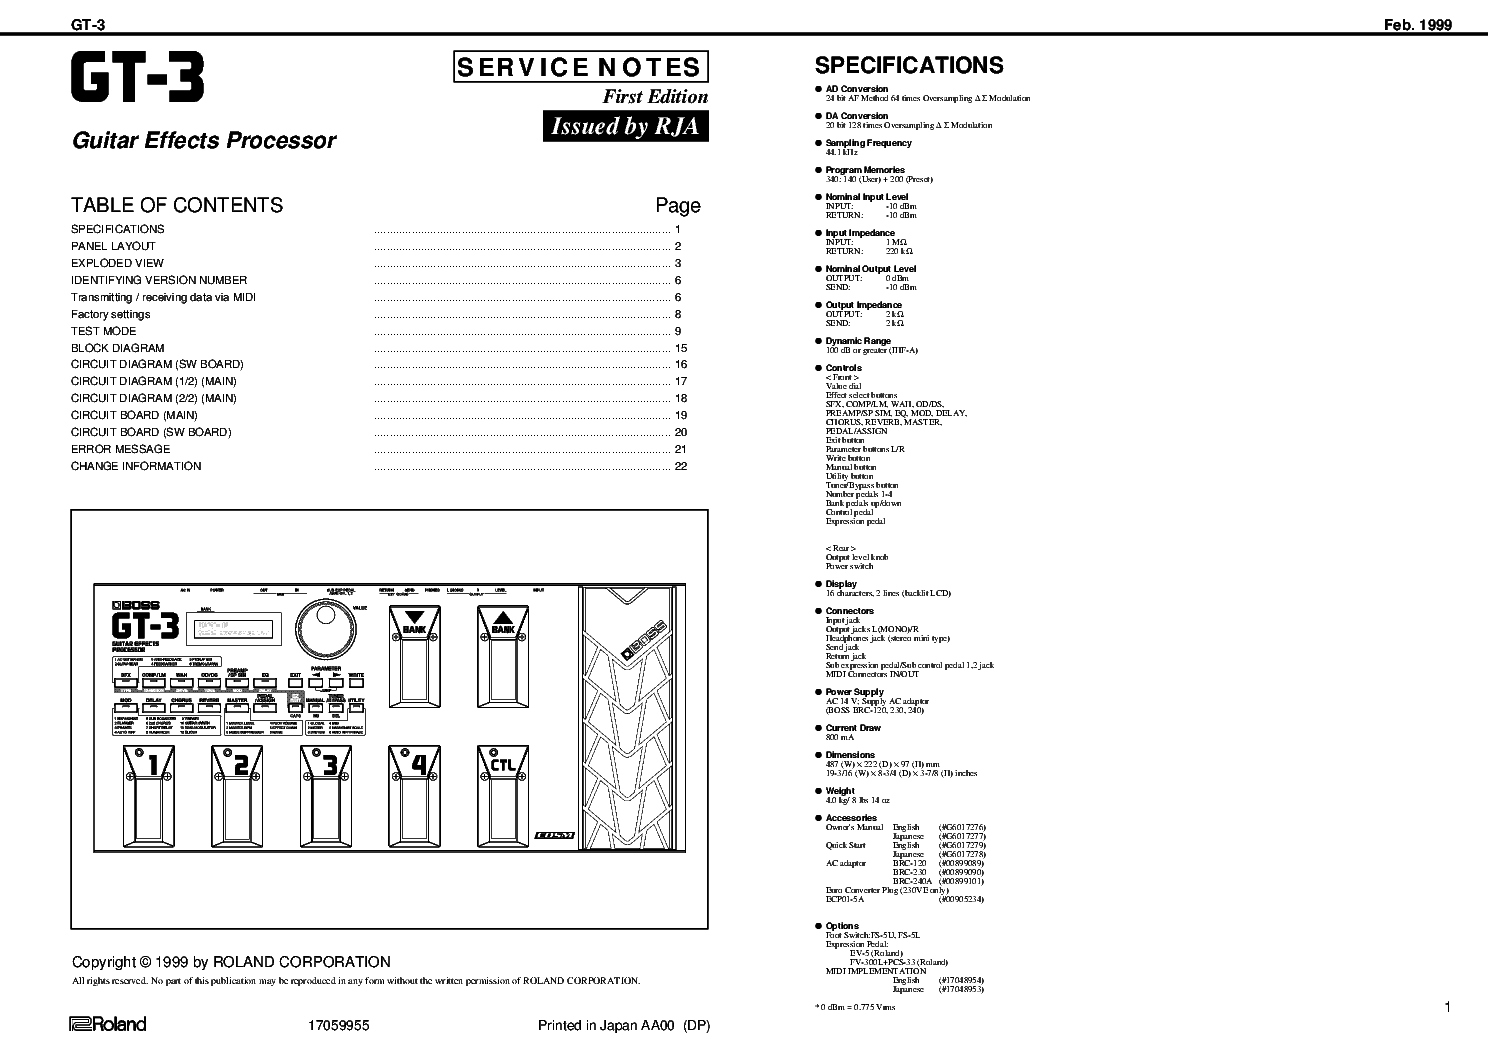 BOSS GT-3 service manual (1st page)